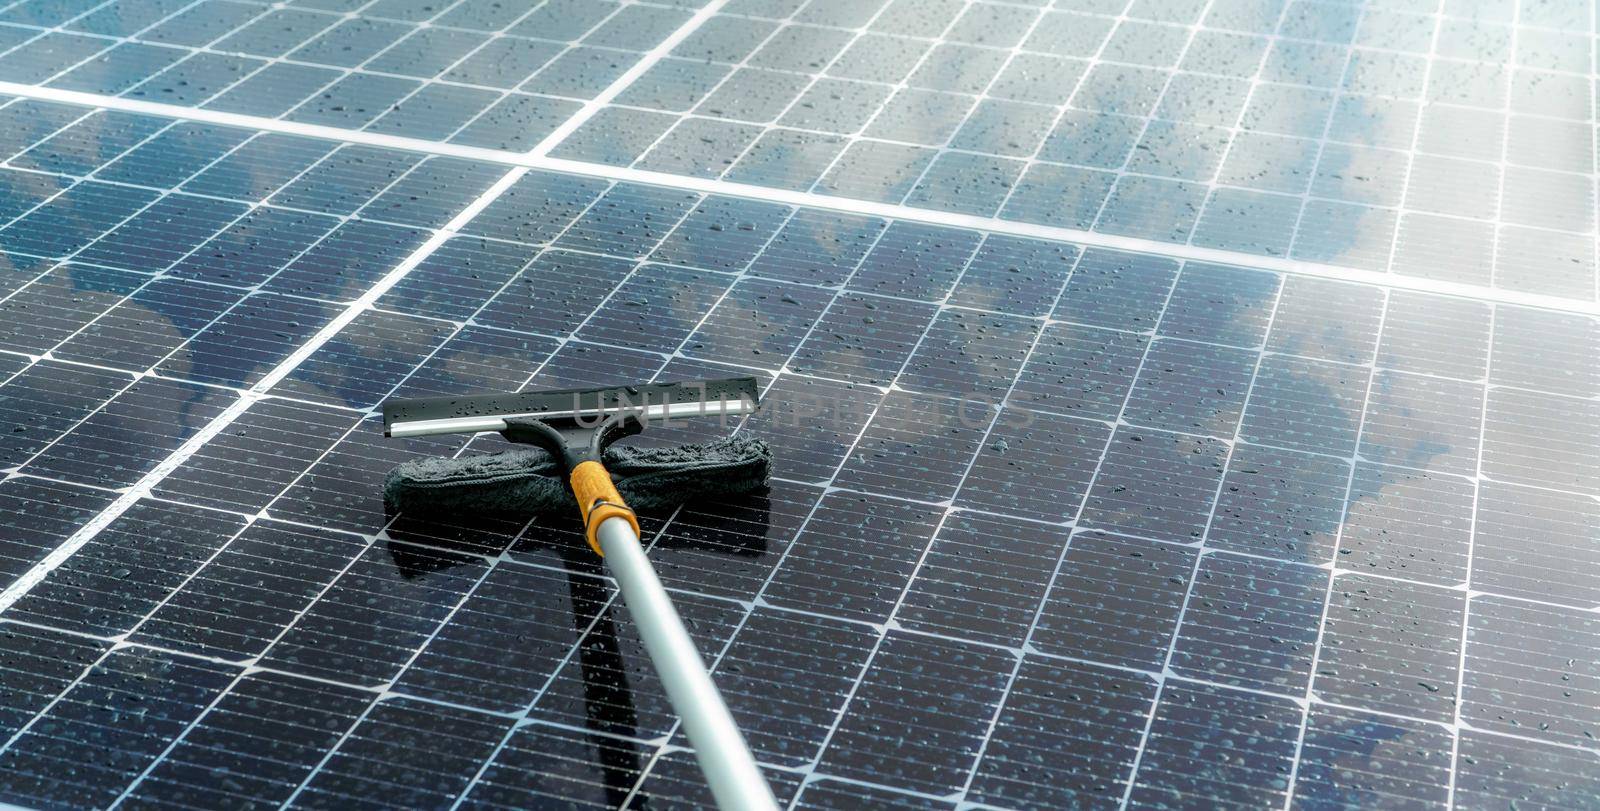 Cleaning solar panel with microfiber mop on wet roof. Solar panel or photovoltaic module maintenance service. Sustainable resource. Solar power. Green energy. Sustainable development technology.